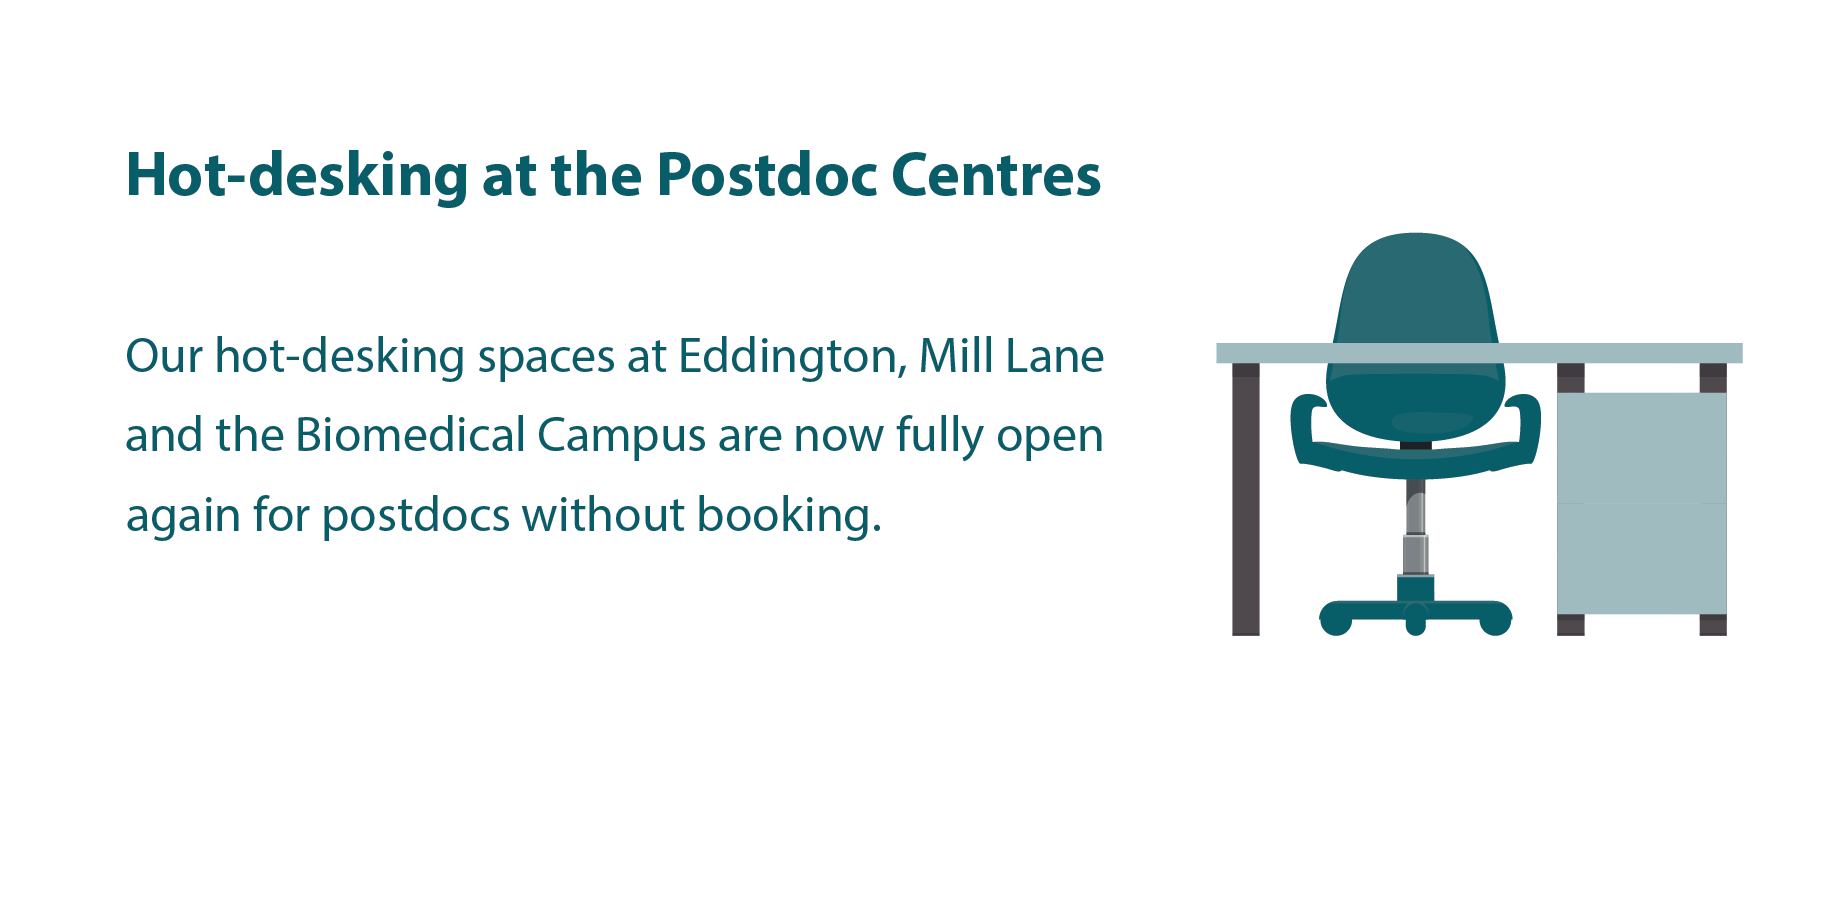 Our hot-desking spaces at Eddington, Mill Lane and the Biomedical Campus are now fully open again for postdocs without booking